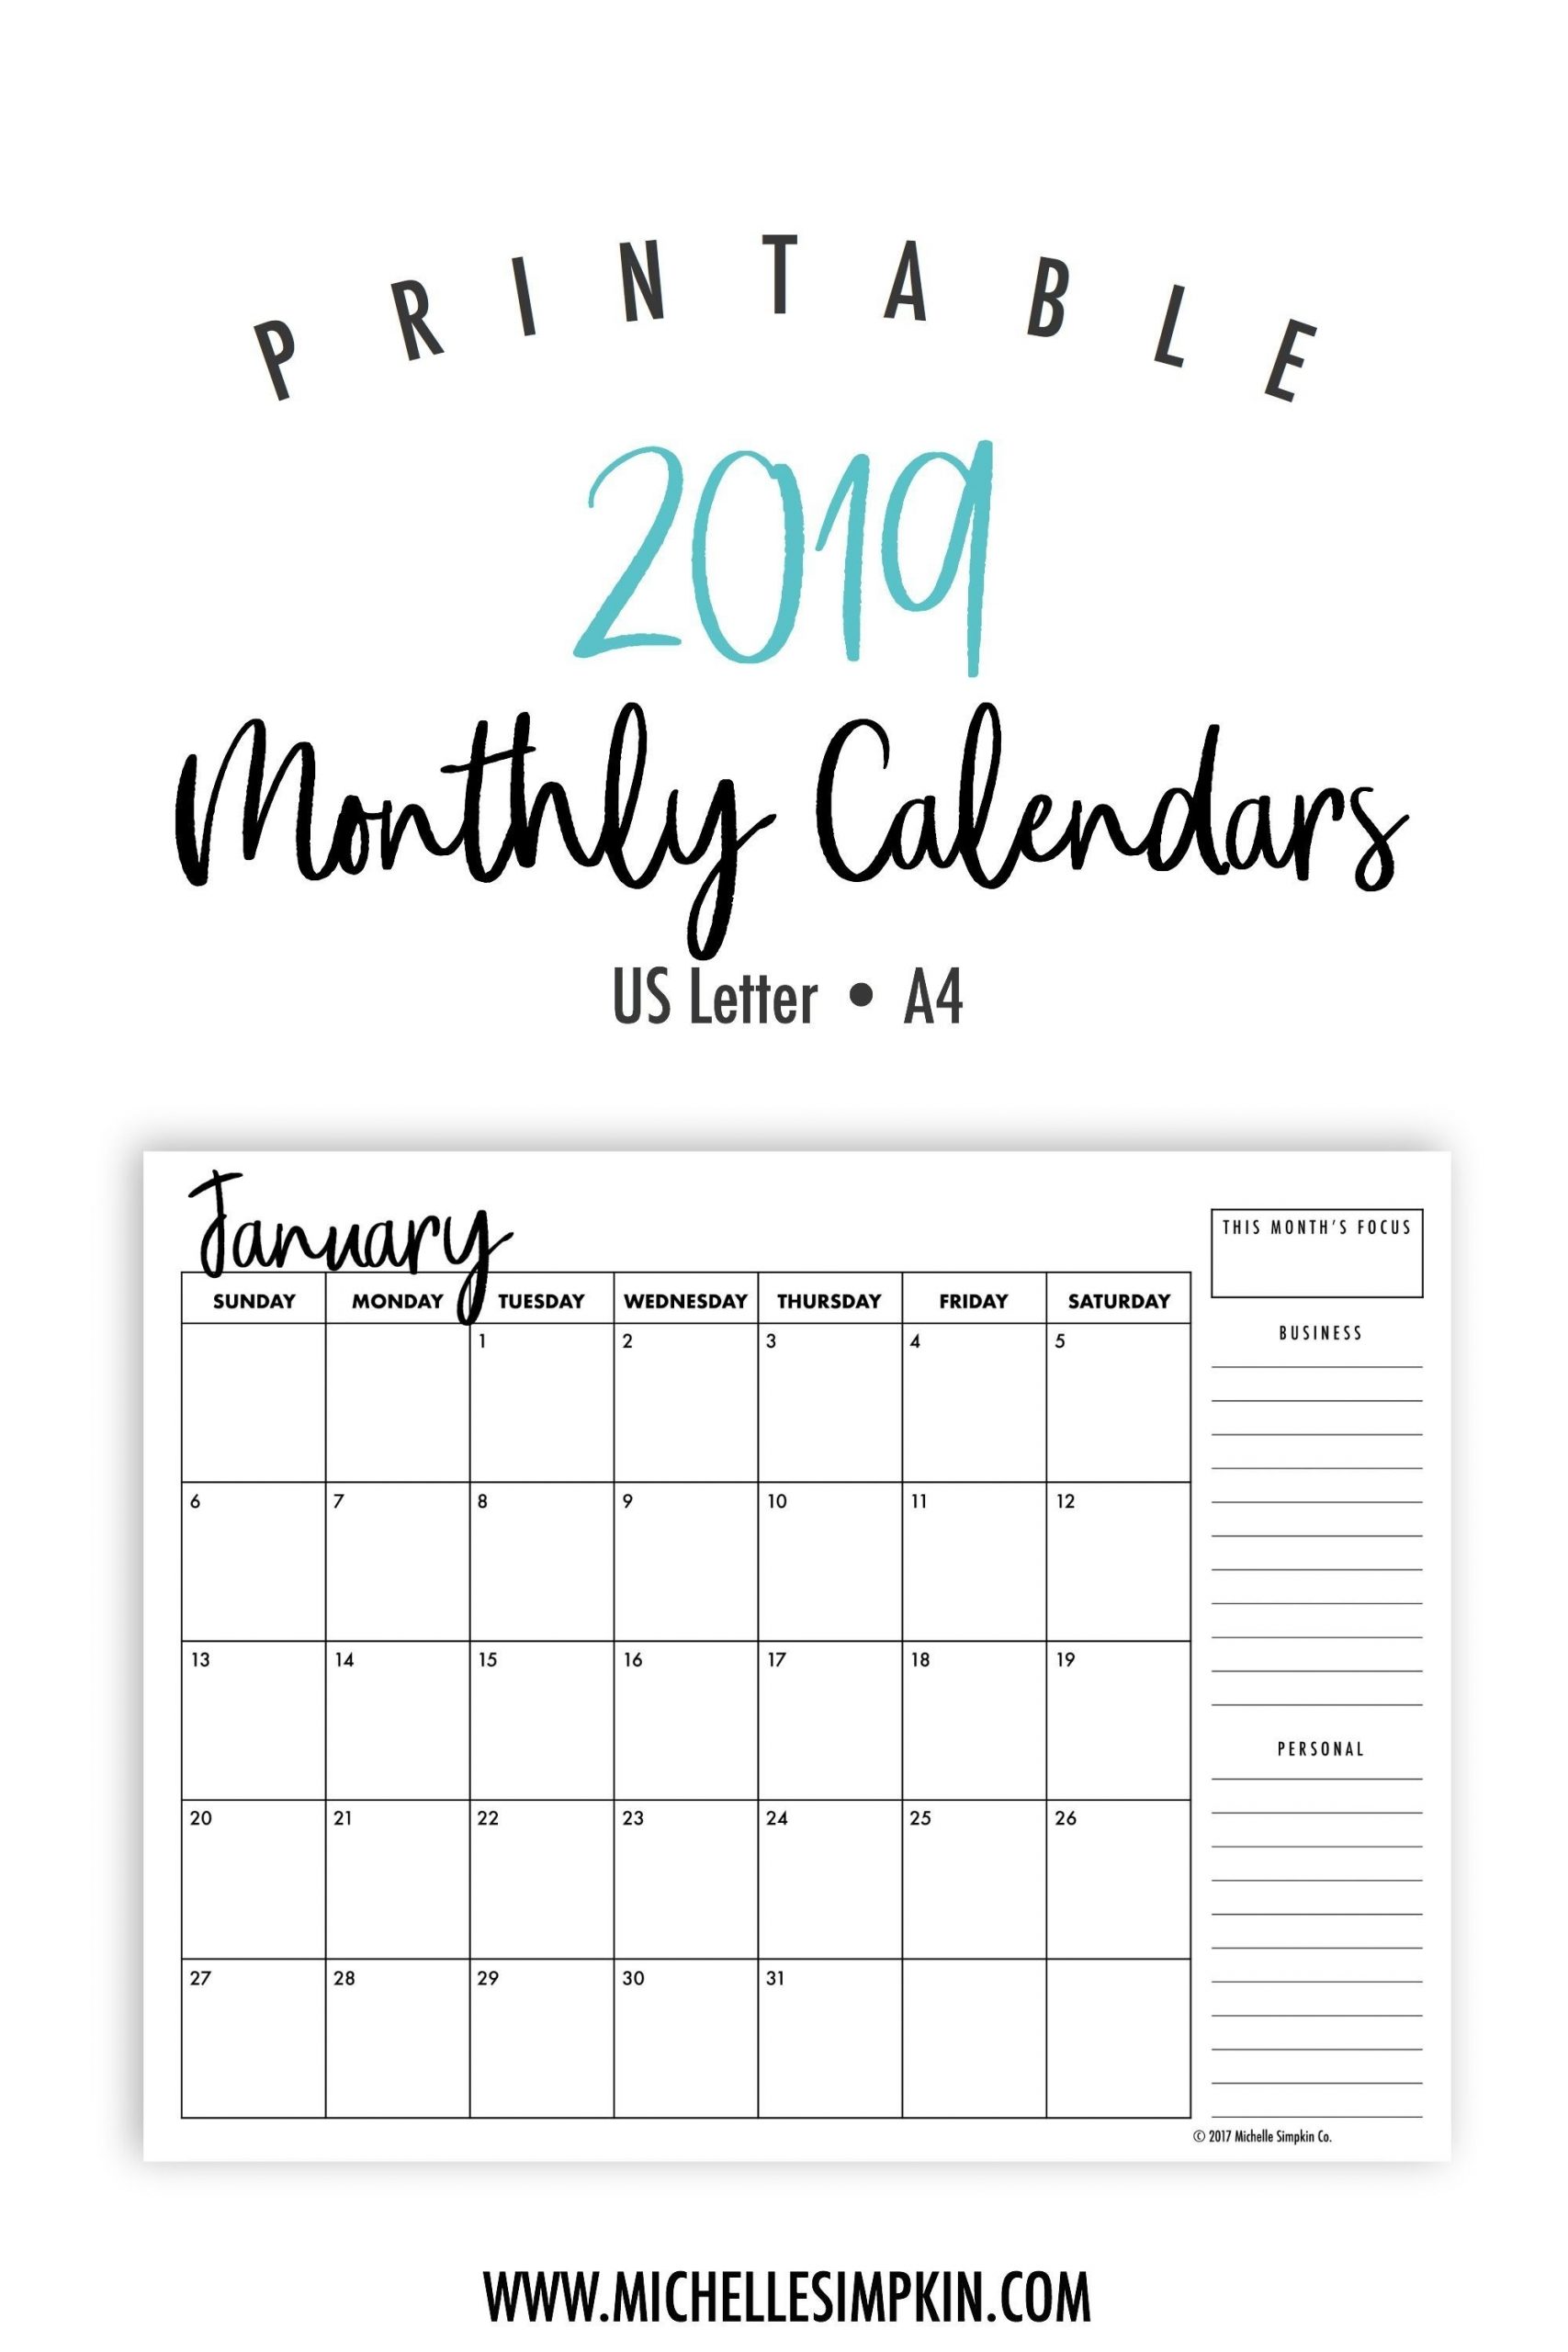 Month At A Glance Calendar Printable In 2020 | Monthly